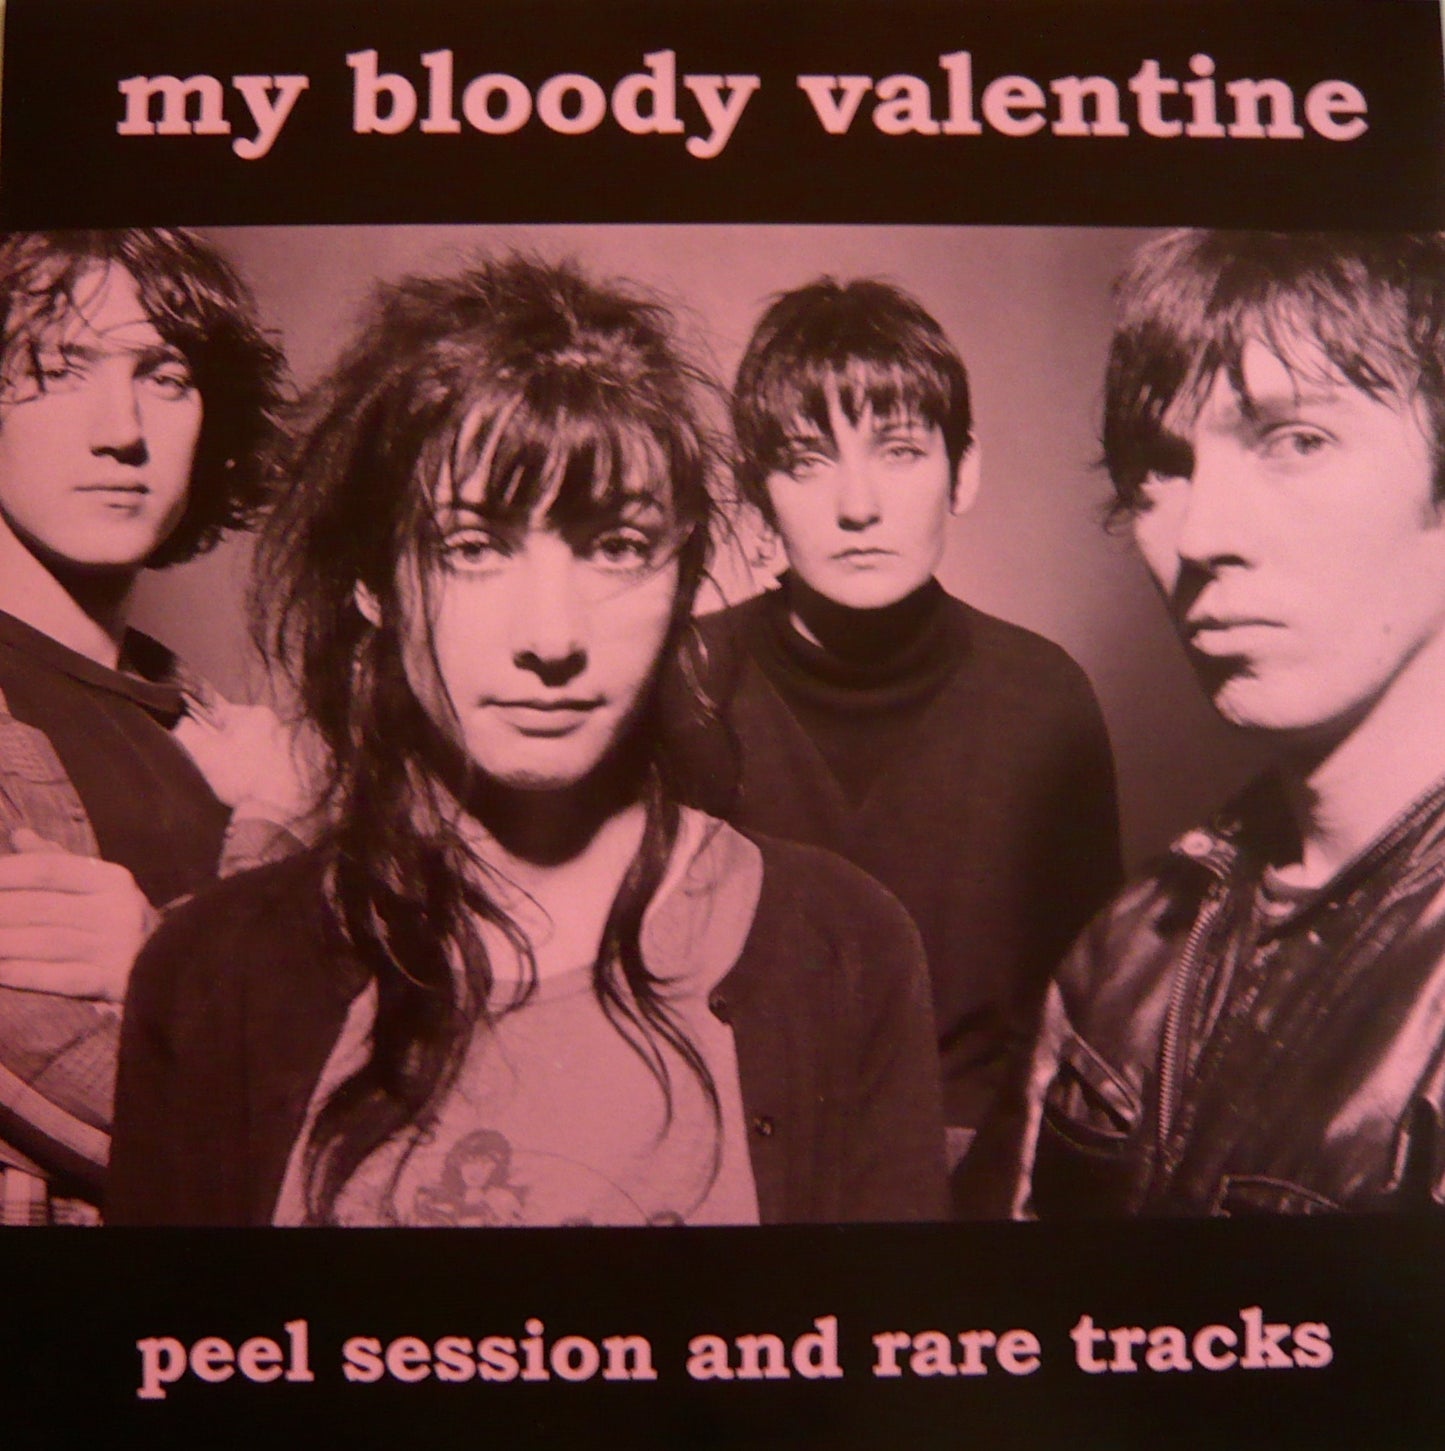 My Bloody Valentine - Peel Session And Rare Tracks